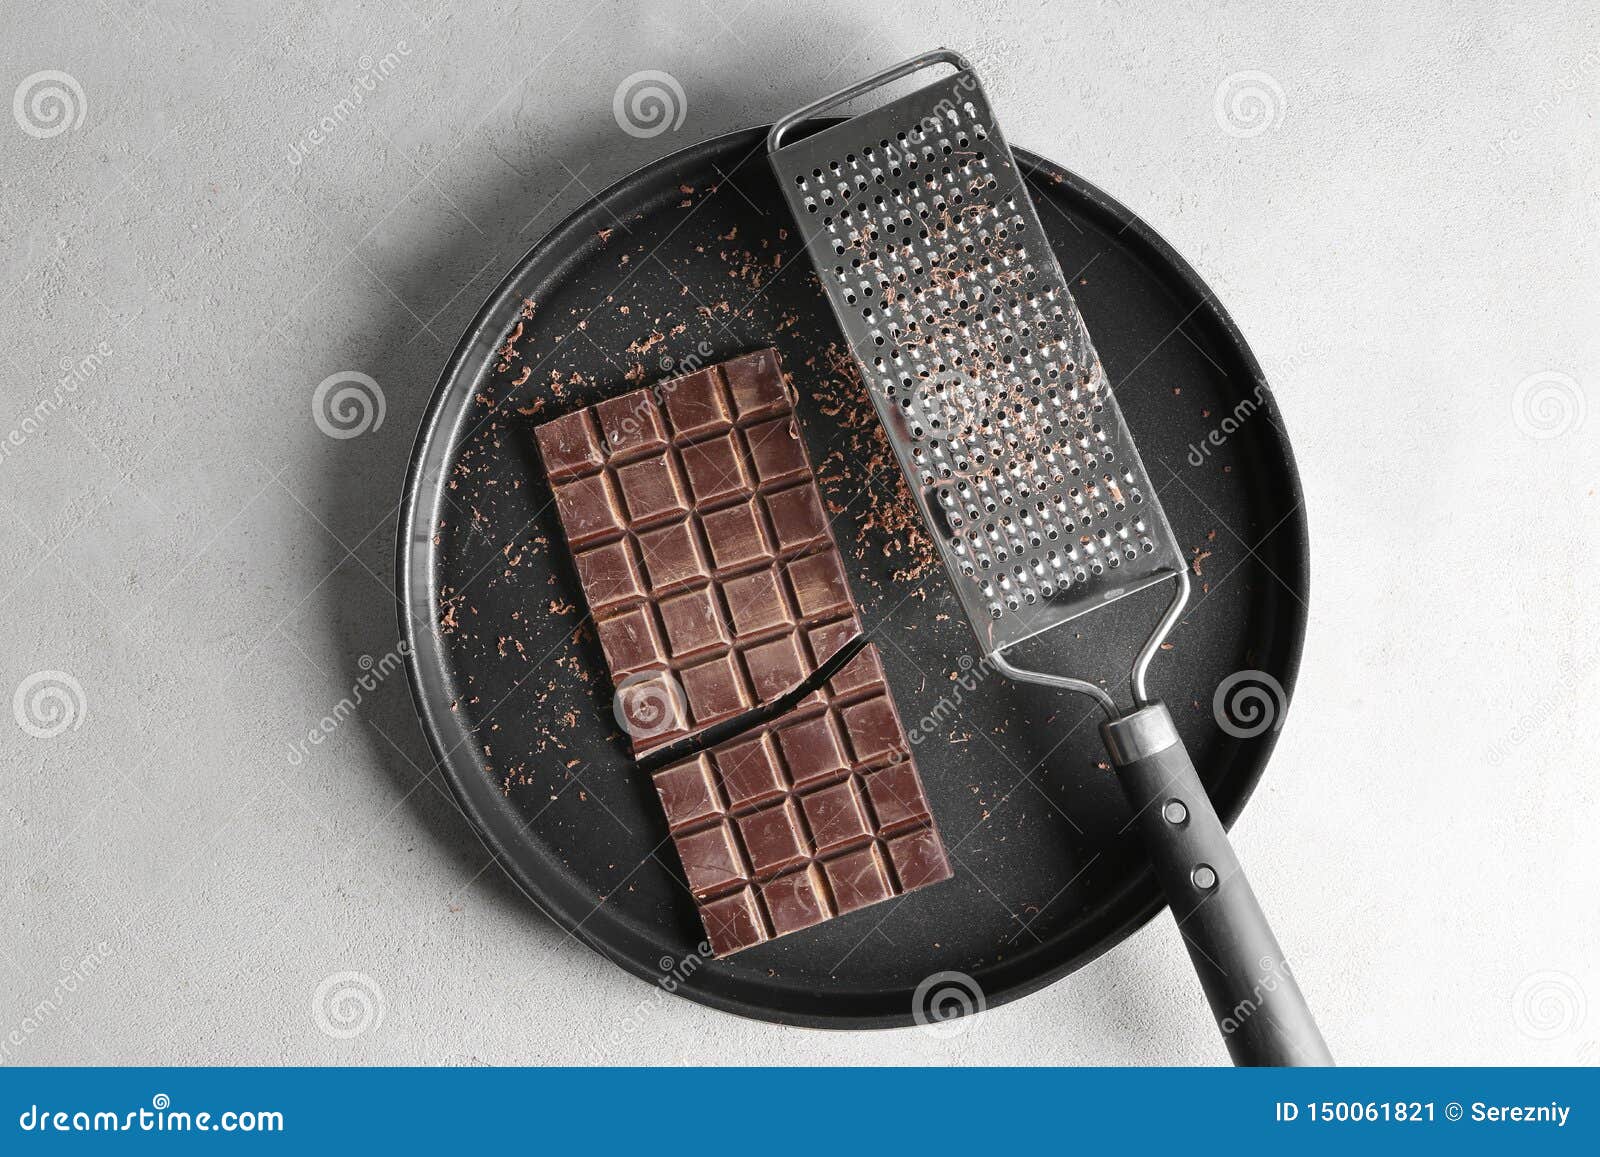 https://thumbs.dreamstime.com/z/delicious-chocolate-grater-plate-150061821.jpg